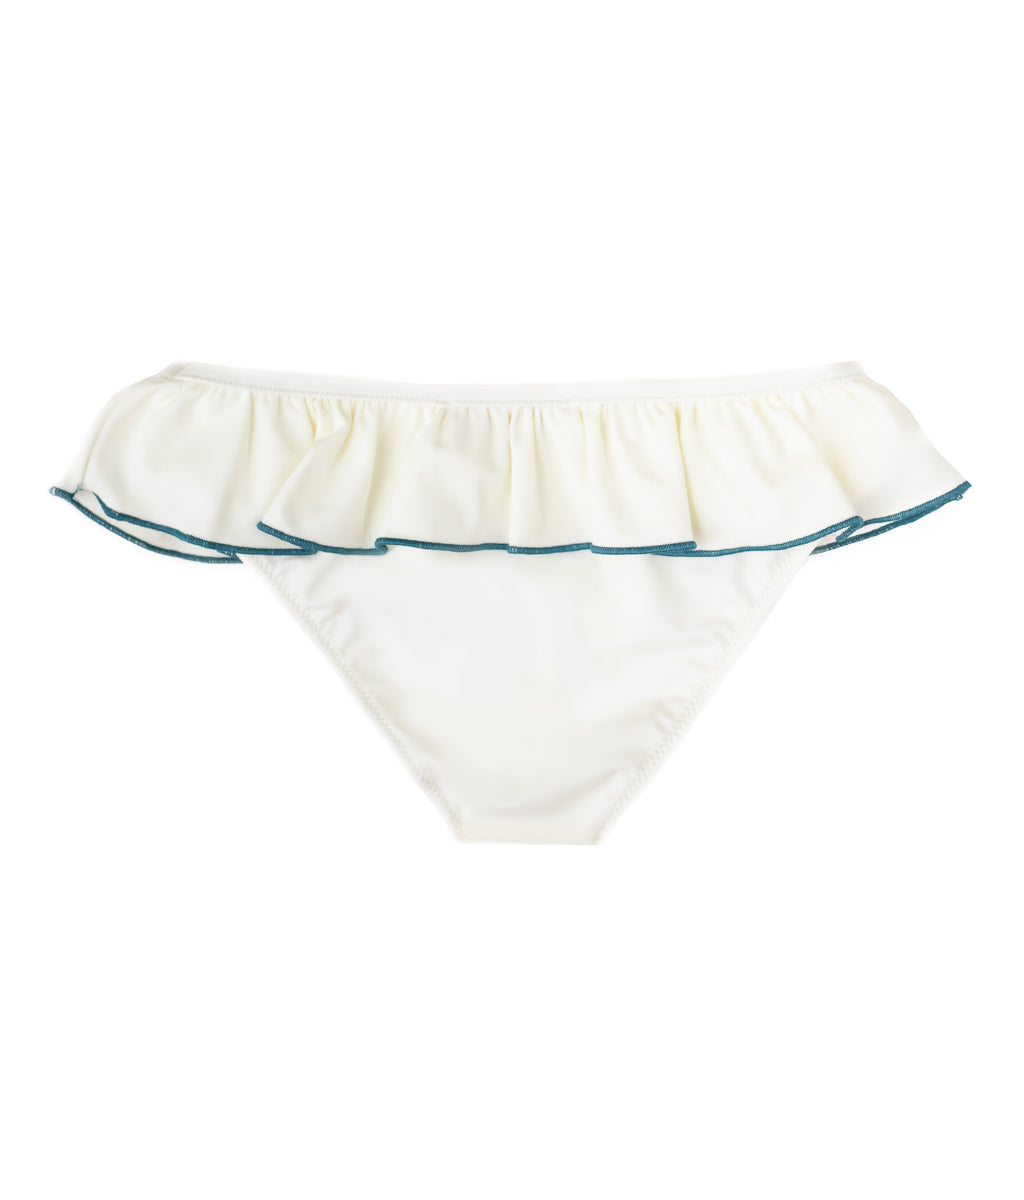 Anna Swim pants in Ivory & Teal